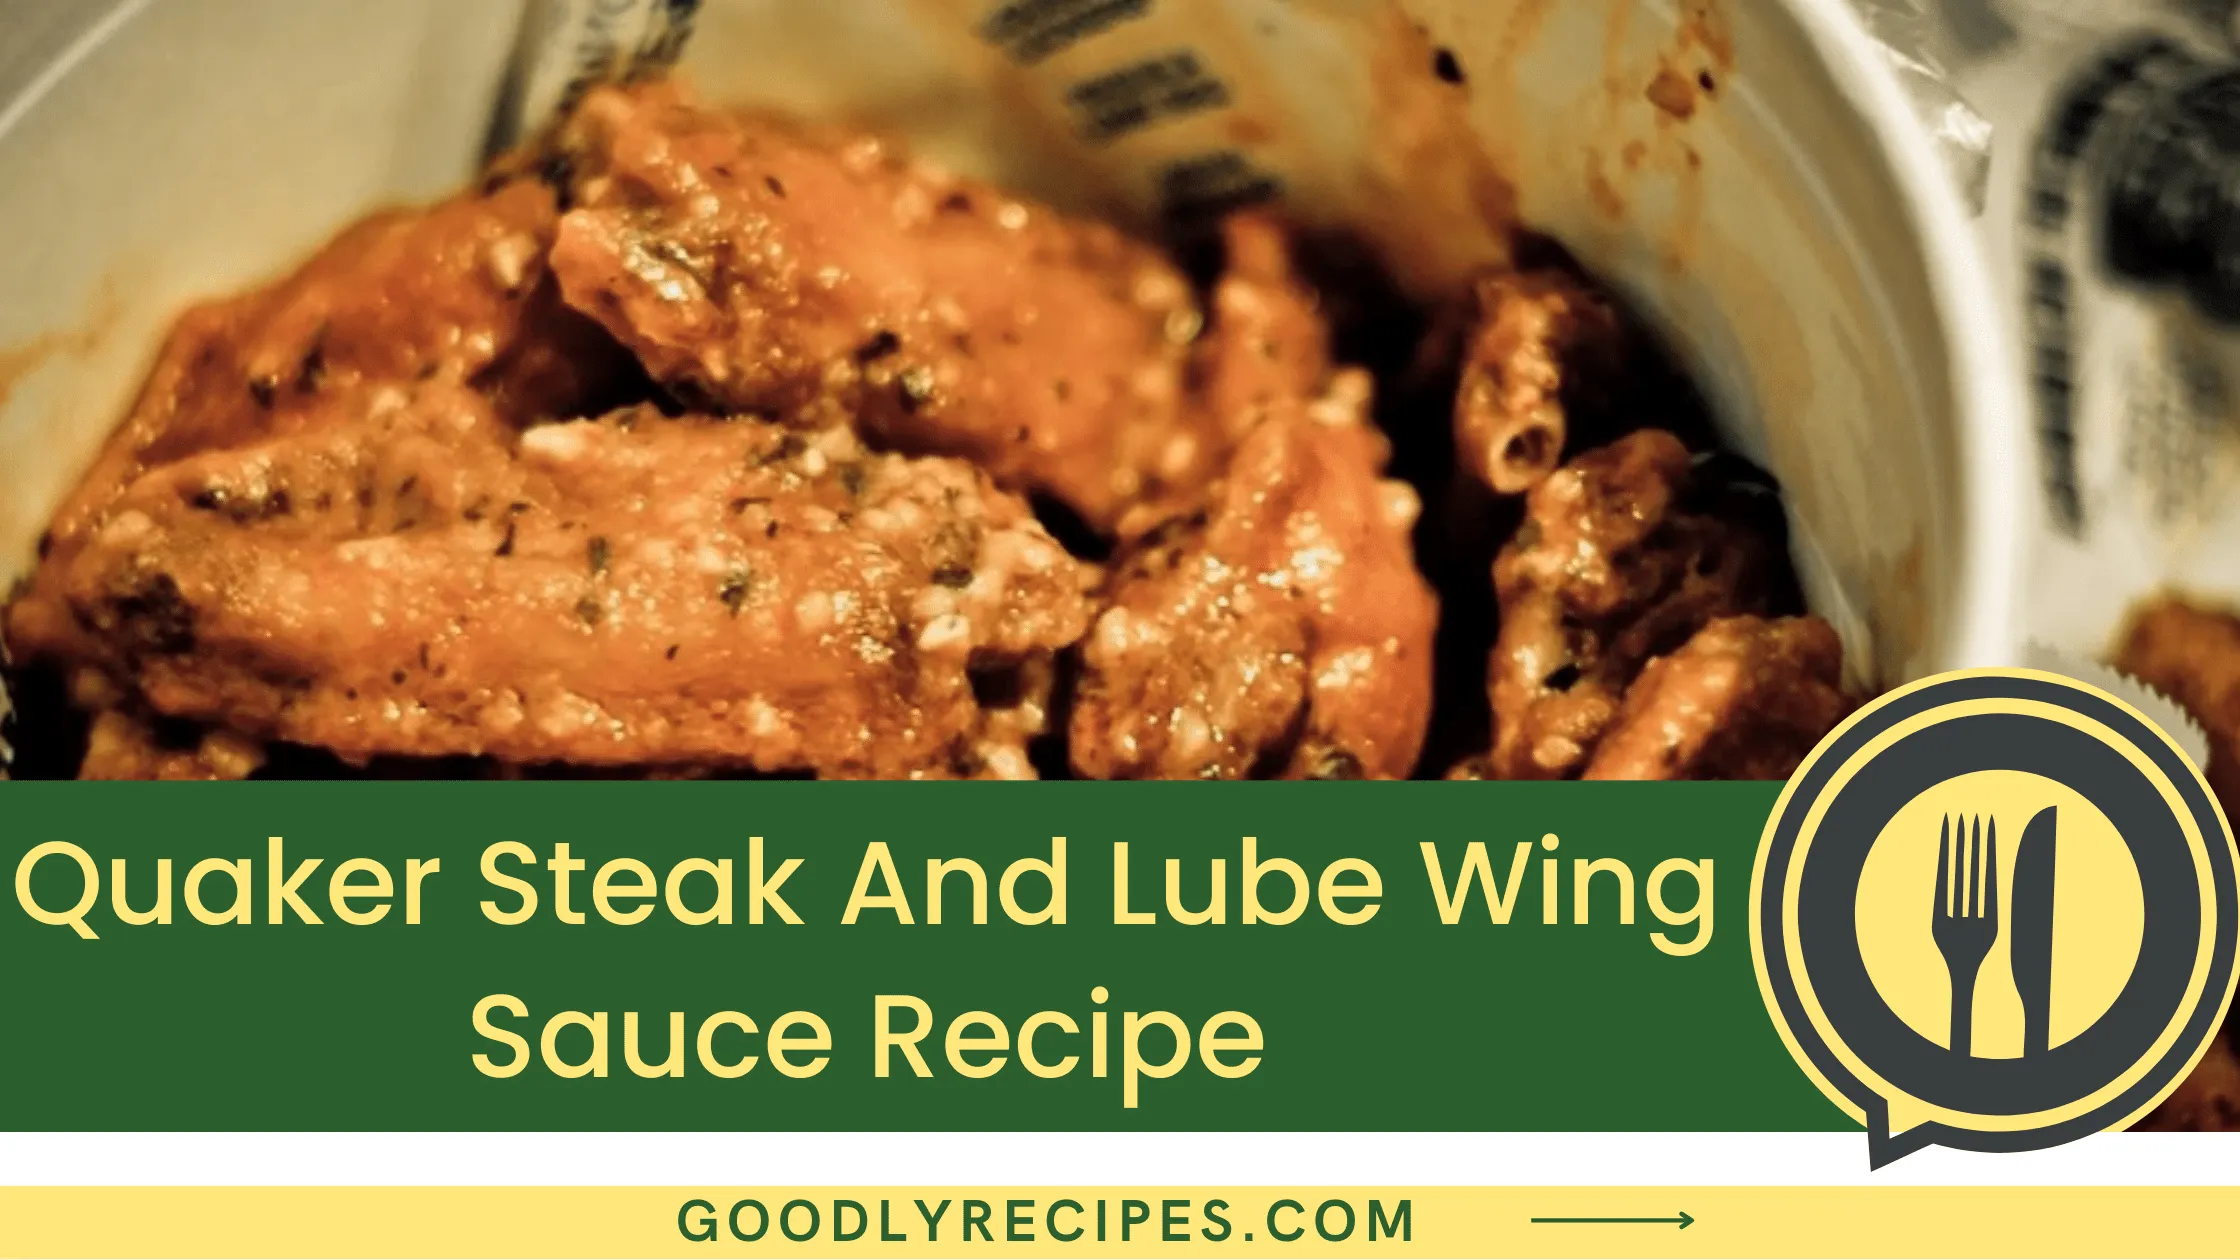 Quaker Steak And Lube Wing Sauce Recipe - For Food Lovers